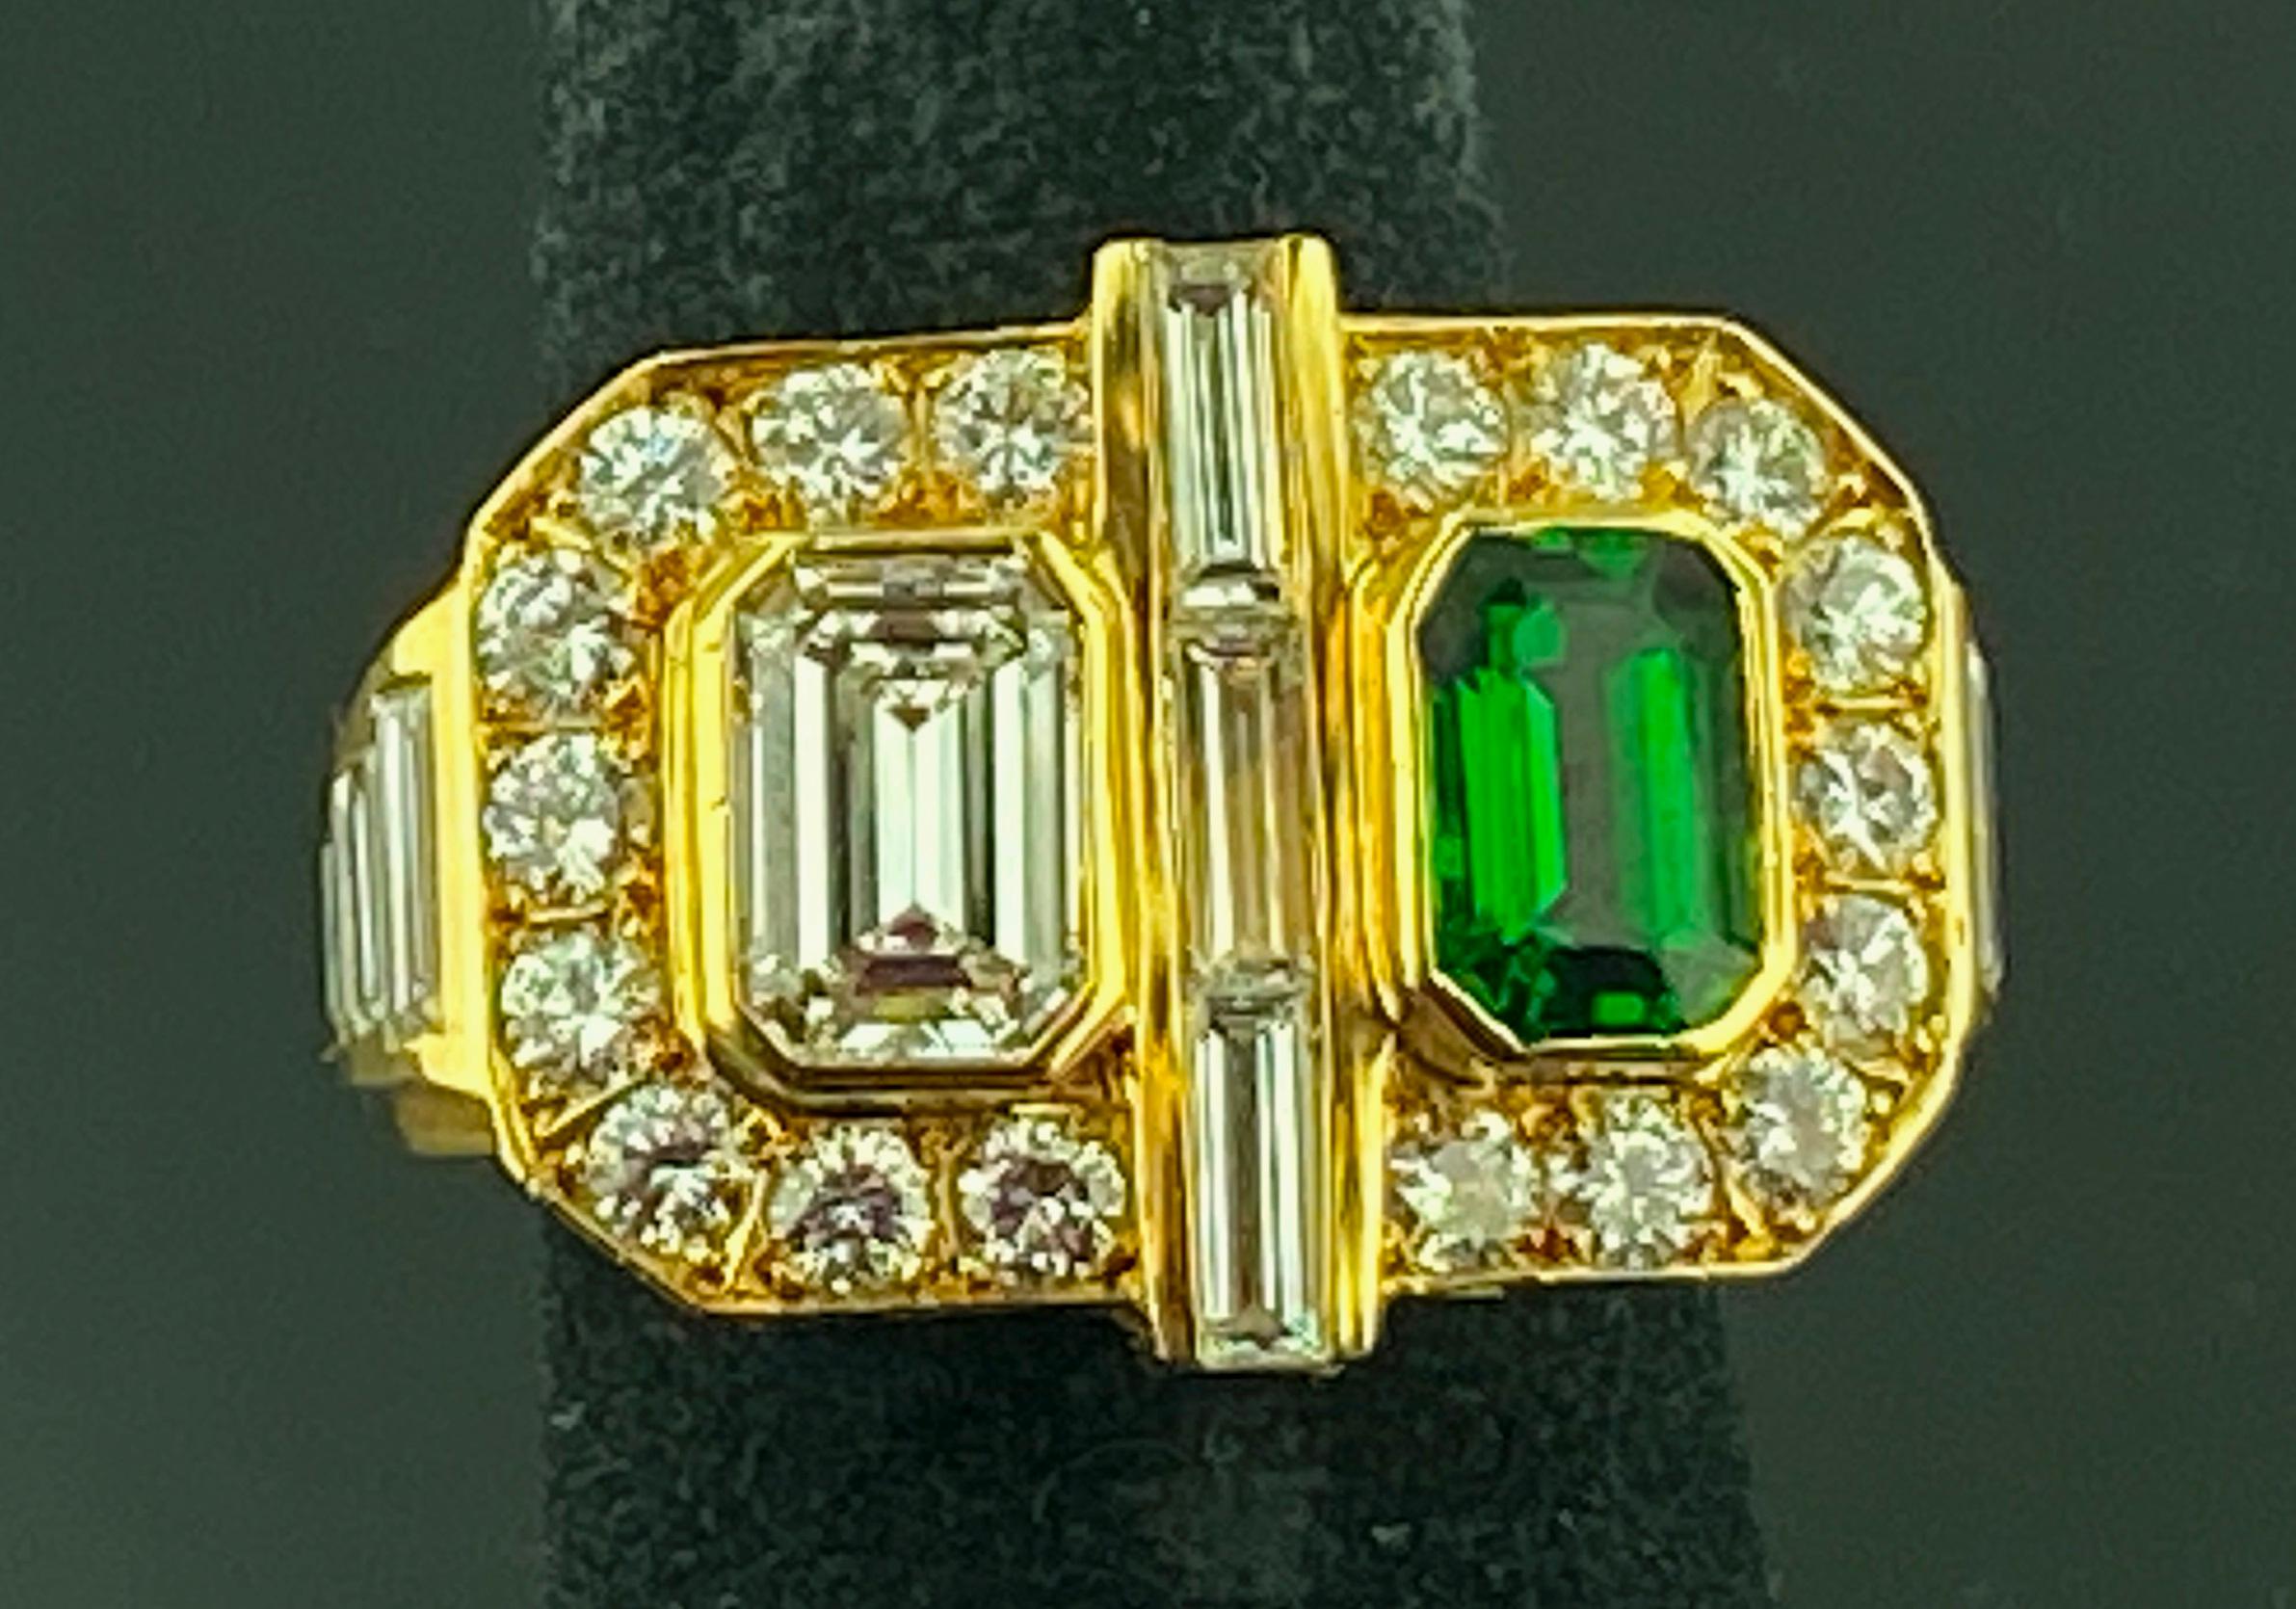 Set in 18 karat yellow gold, weighing 10 grams, is one 1.06 carat Emerald Cut Diamond and one 1.10 Emerald Cut Tsavorite with 15 baguette cut diamonds weighing 1.50 carats and 18 Round Brilliant Cut Diamonds weighing 0.90 carats.  Color: F-G,